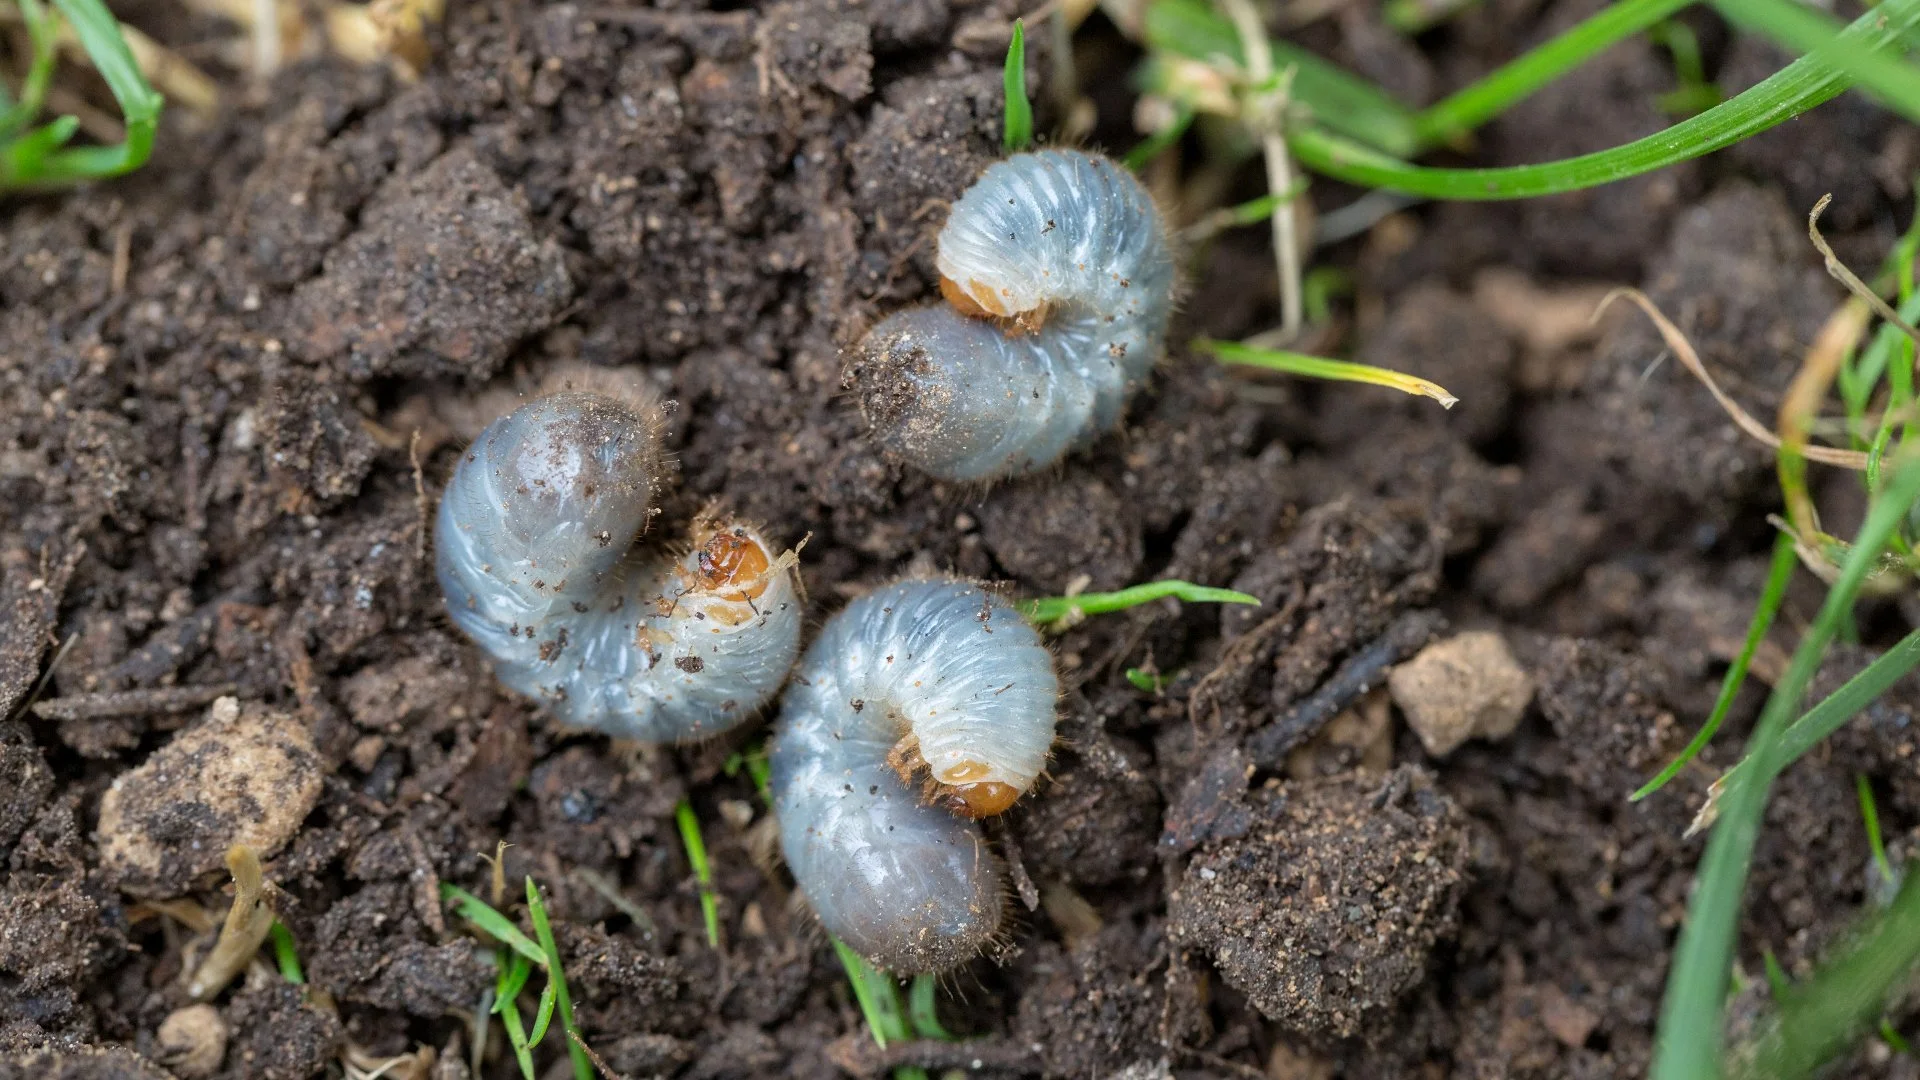 Protect Your Lawn This Year - Invest in Preventative Grub Control!